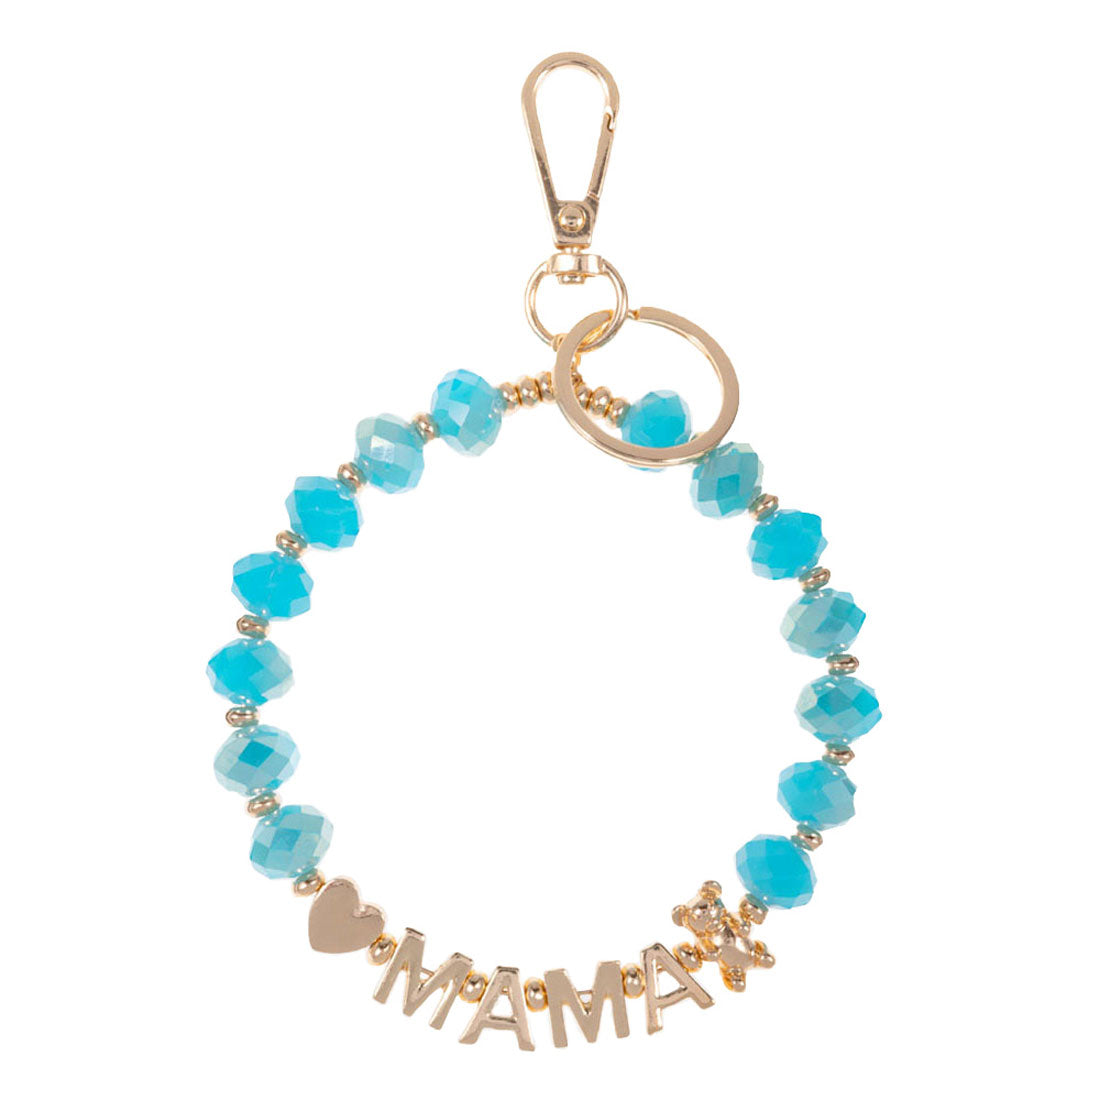 Turquoise Mama Message Heart Bear Pointed Faceted Beaded Key Chain Bracelet. Make your mom feel special with this gorgeous Infinity Bracelet gift! Her heart will swell with joy!  This mom's bracelet is the best appreciation gift and regards to love, sacrifice, pain and care both given and taken in playing her role of mother in the family. Perfect Mother's Day gift for all the special women in your life, be it mother, wife, sister or daughter..